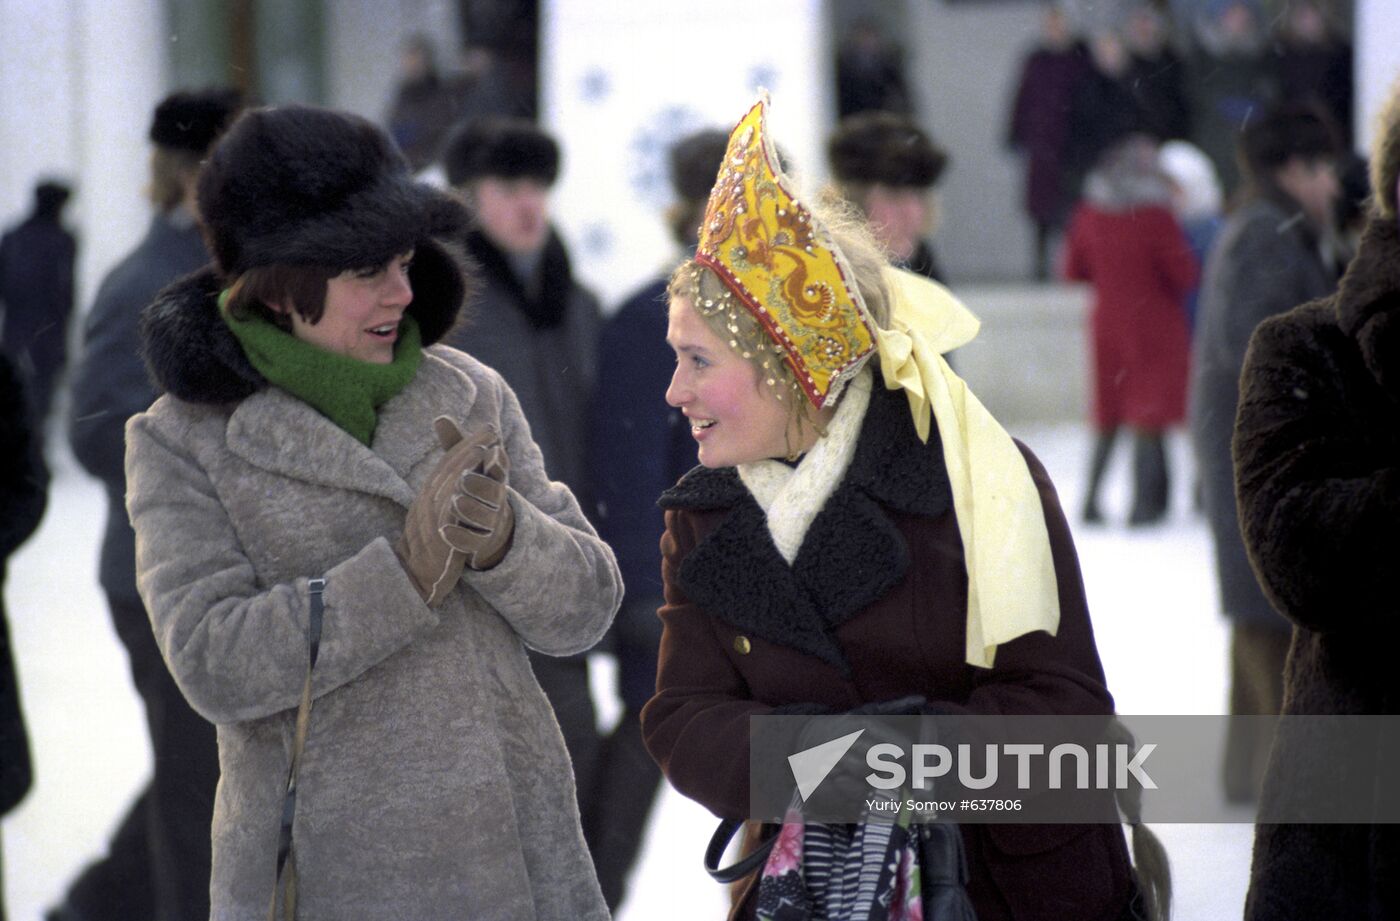 Guests at "Russian winter" festival